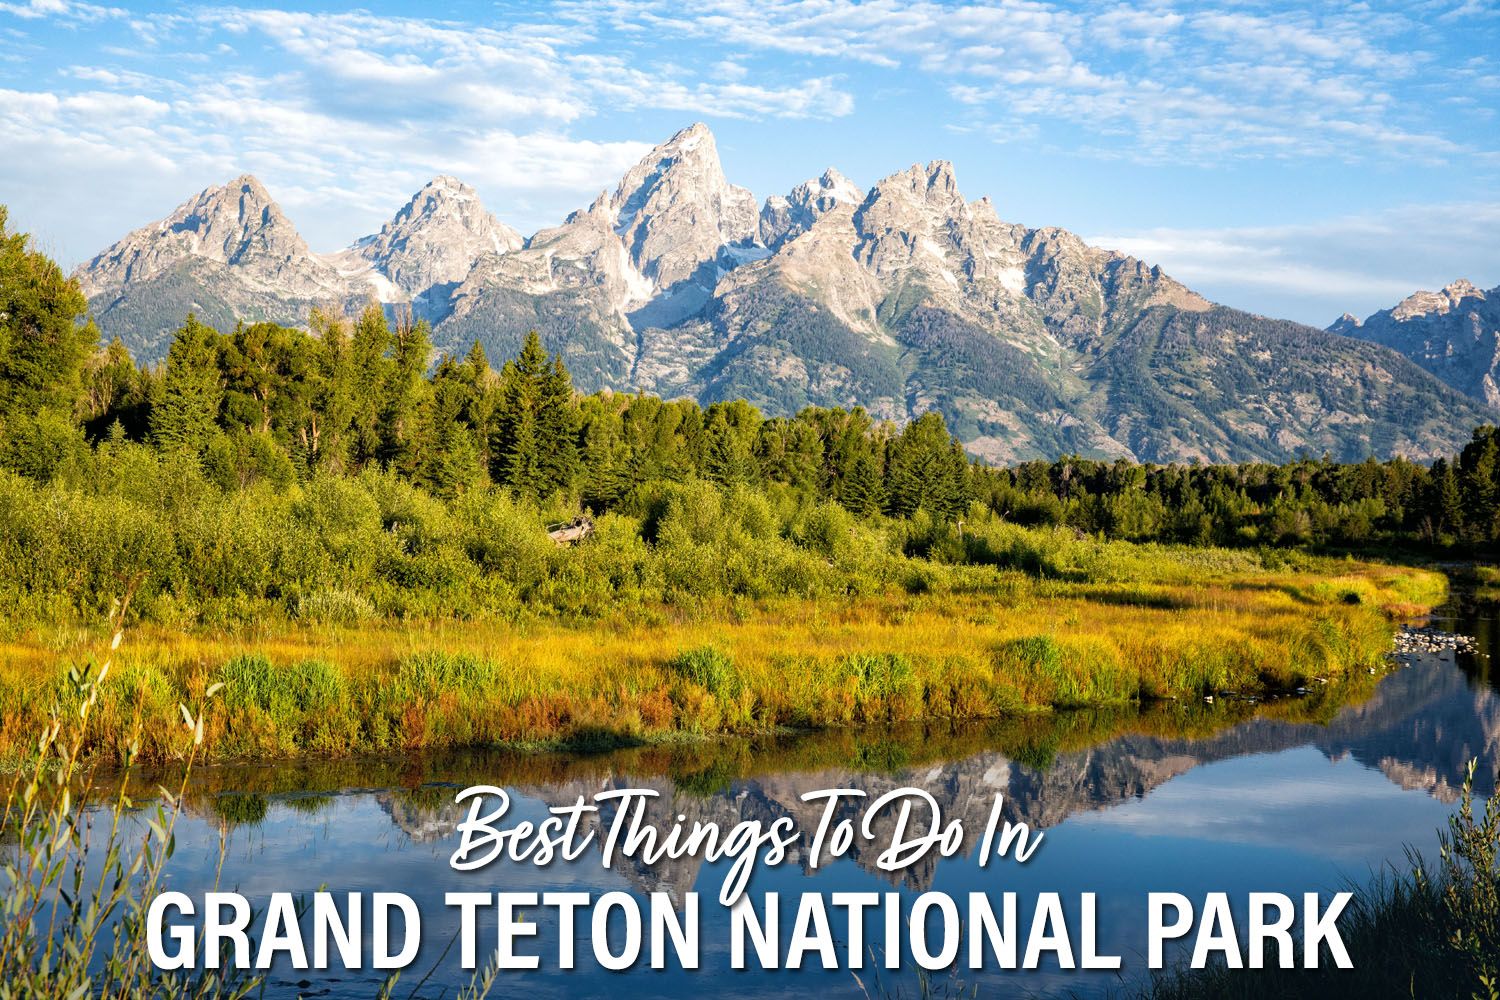 Best things to do in Grand Teton